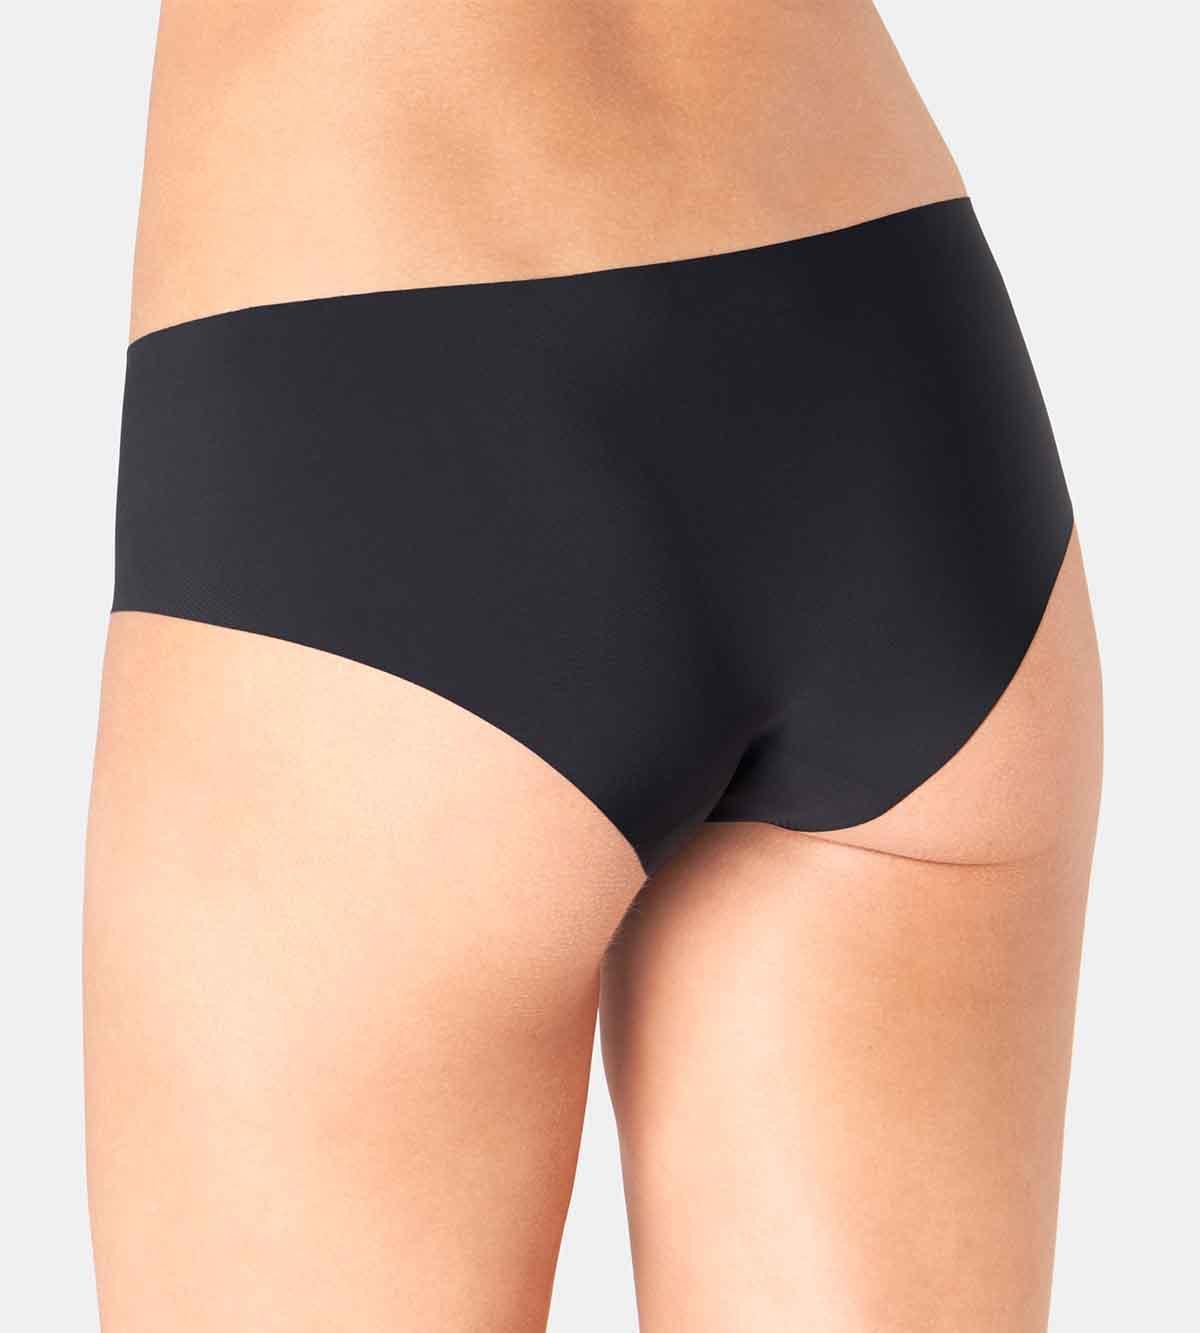 Sloggi Zero Feel Hipster - Briefs  Available at Illusions Lingerie